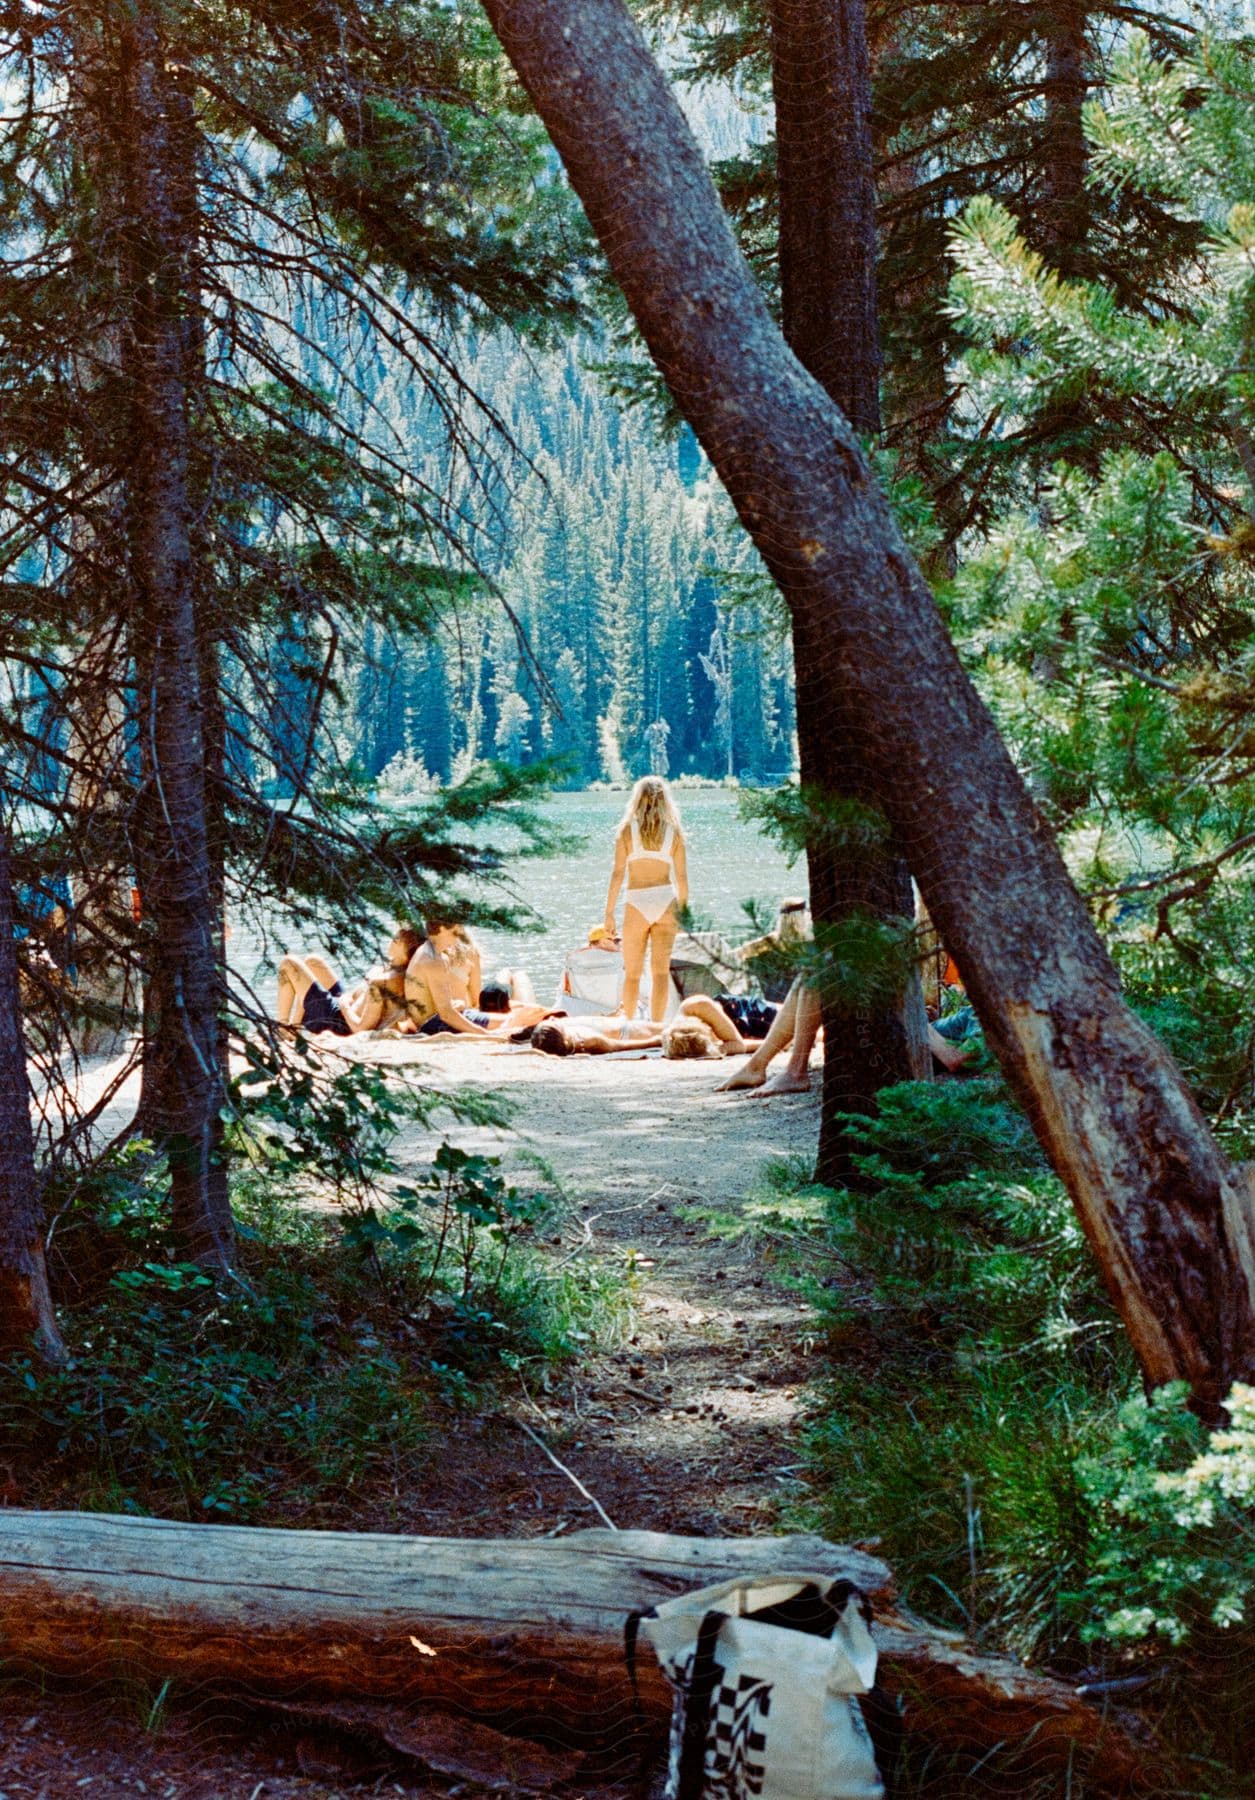 A group of people relax next to a lake in an evergreen forest.